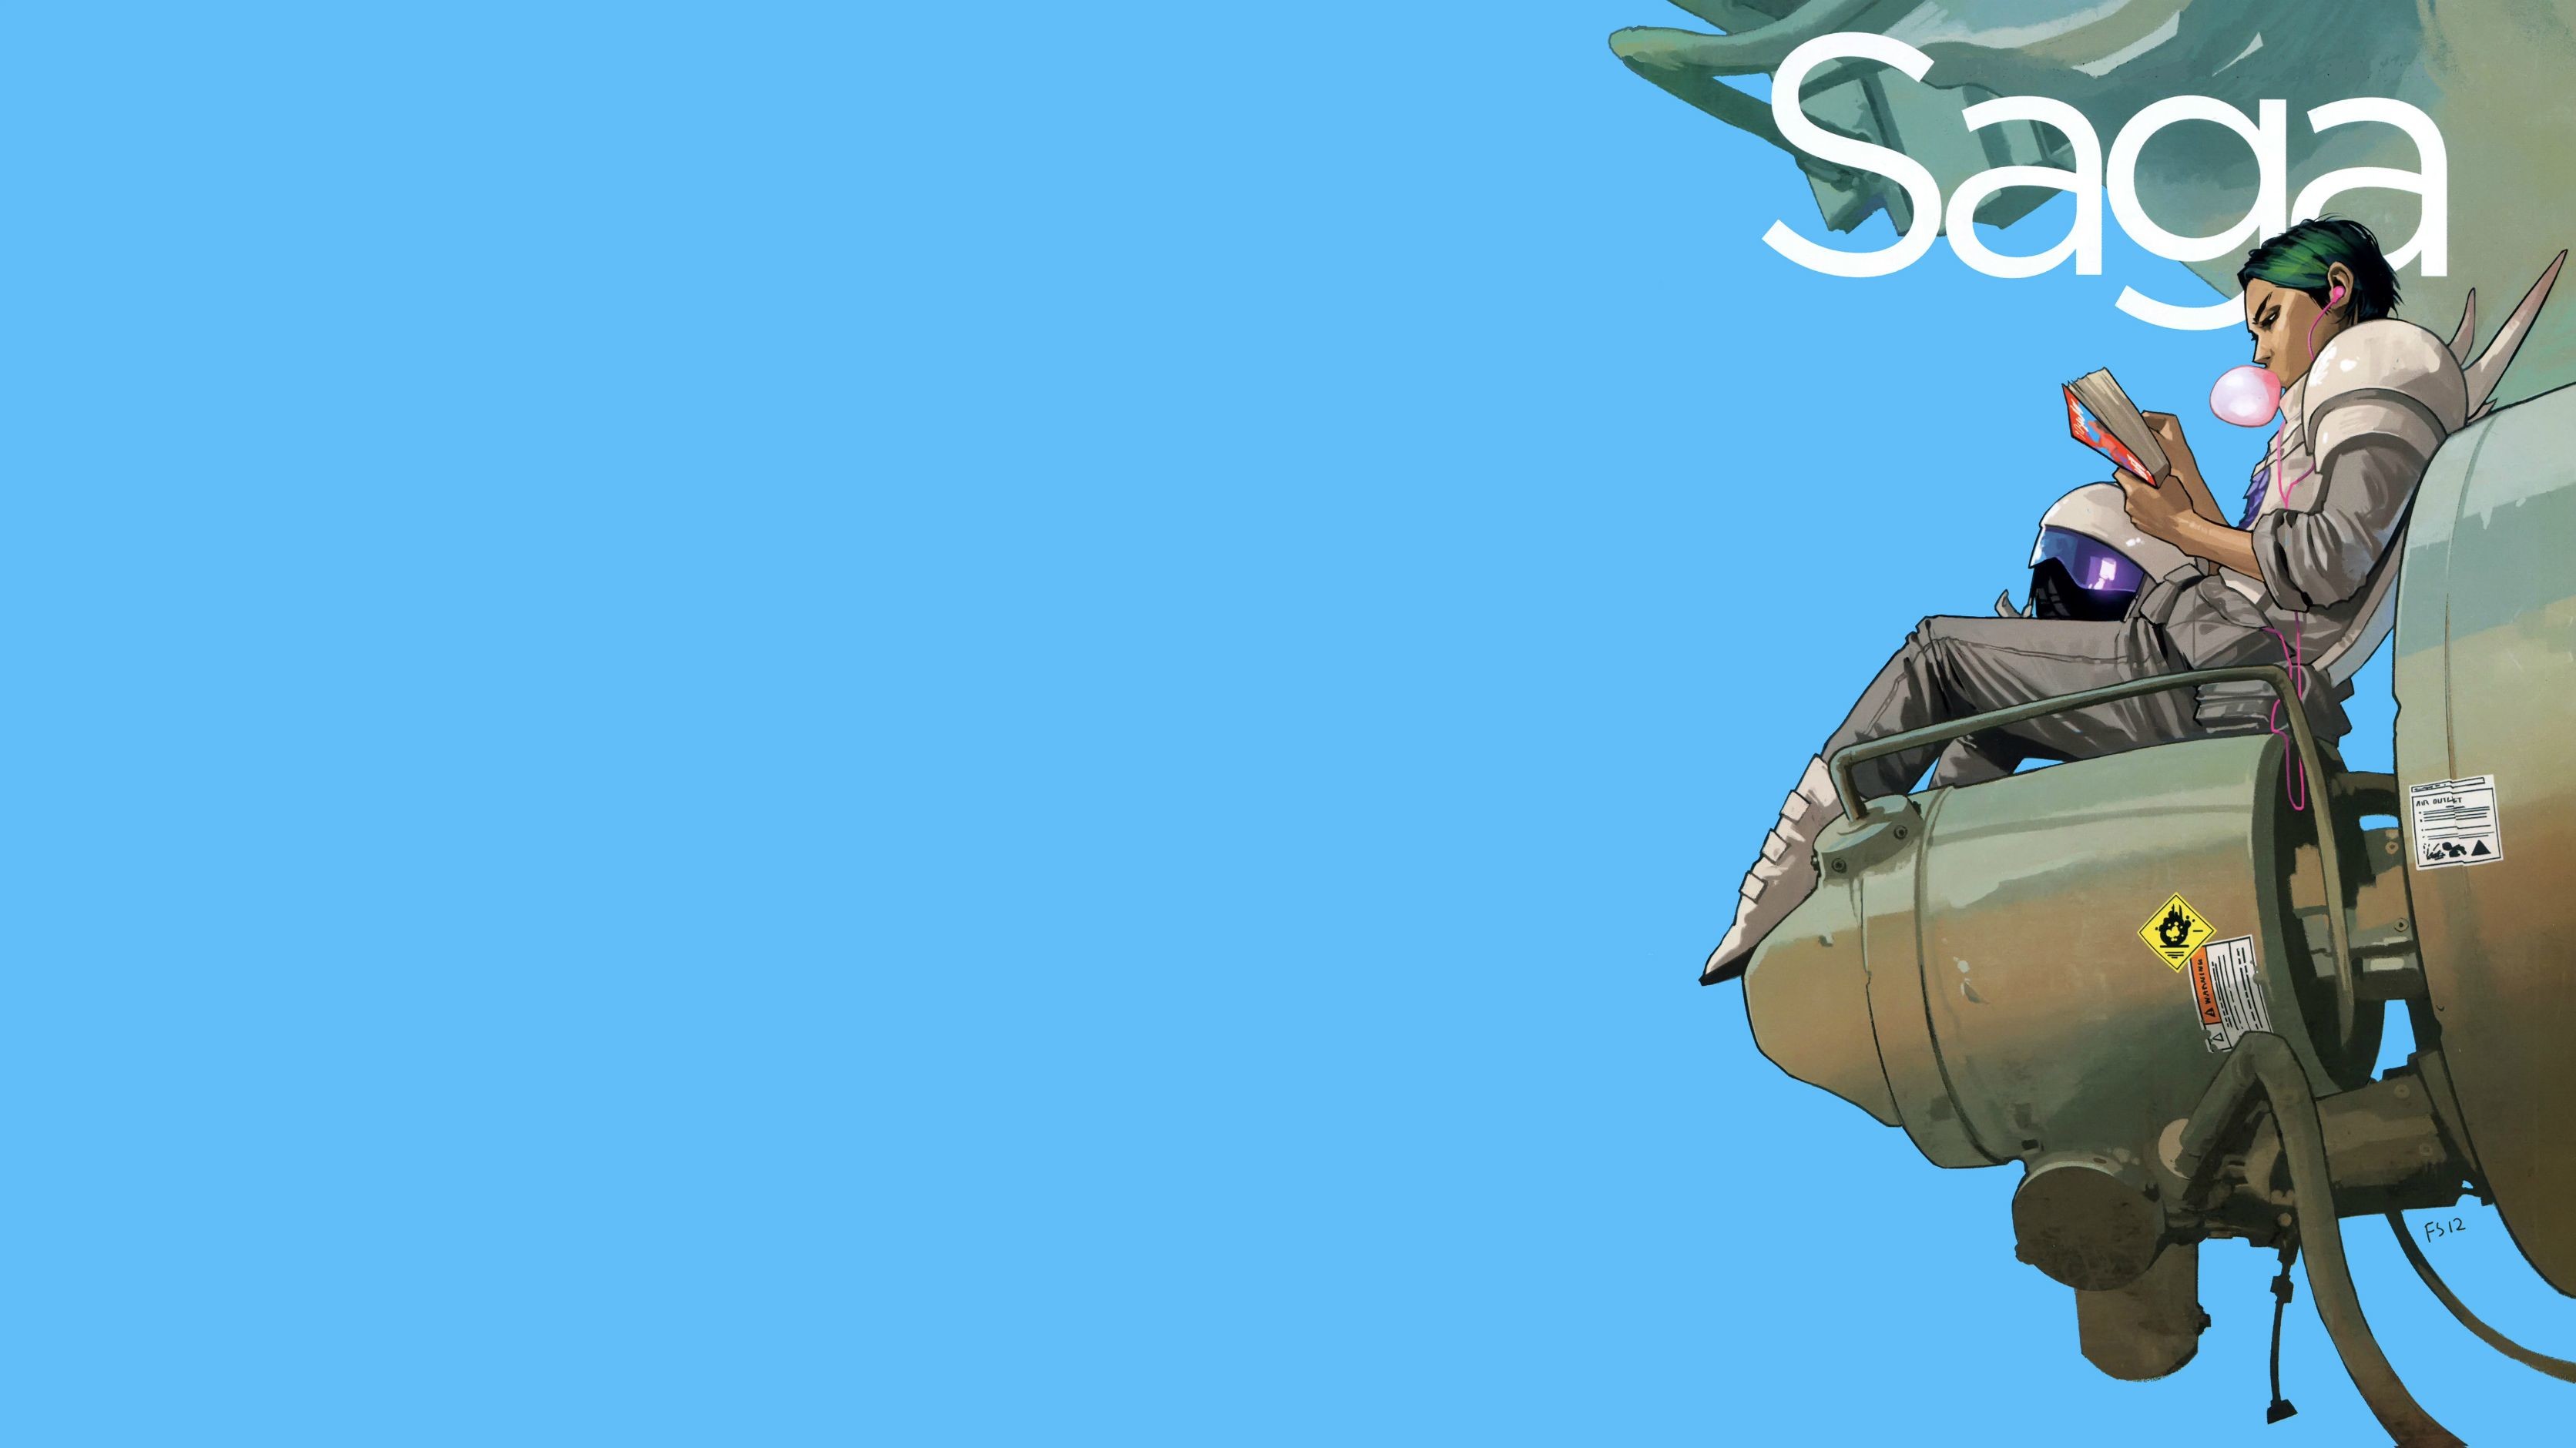 3344x1880 Made a wallpaper out of the cover to Saga #8. Not sure whether or